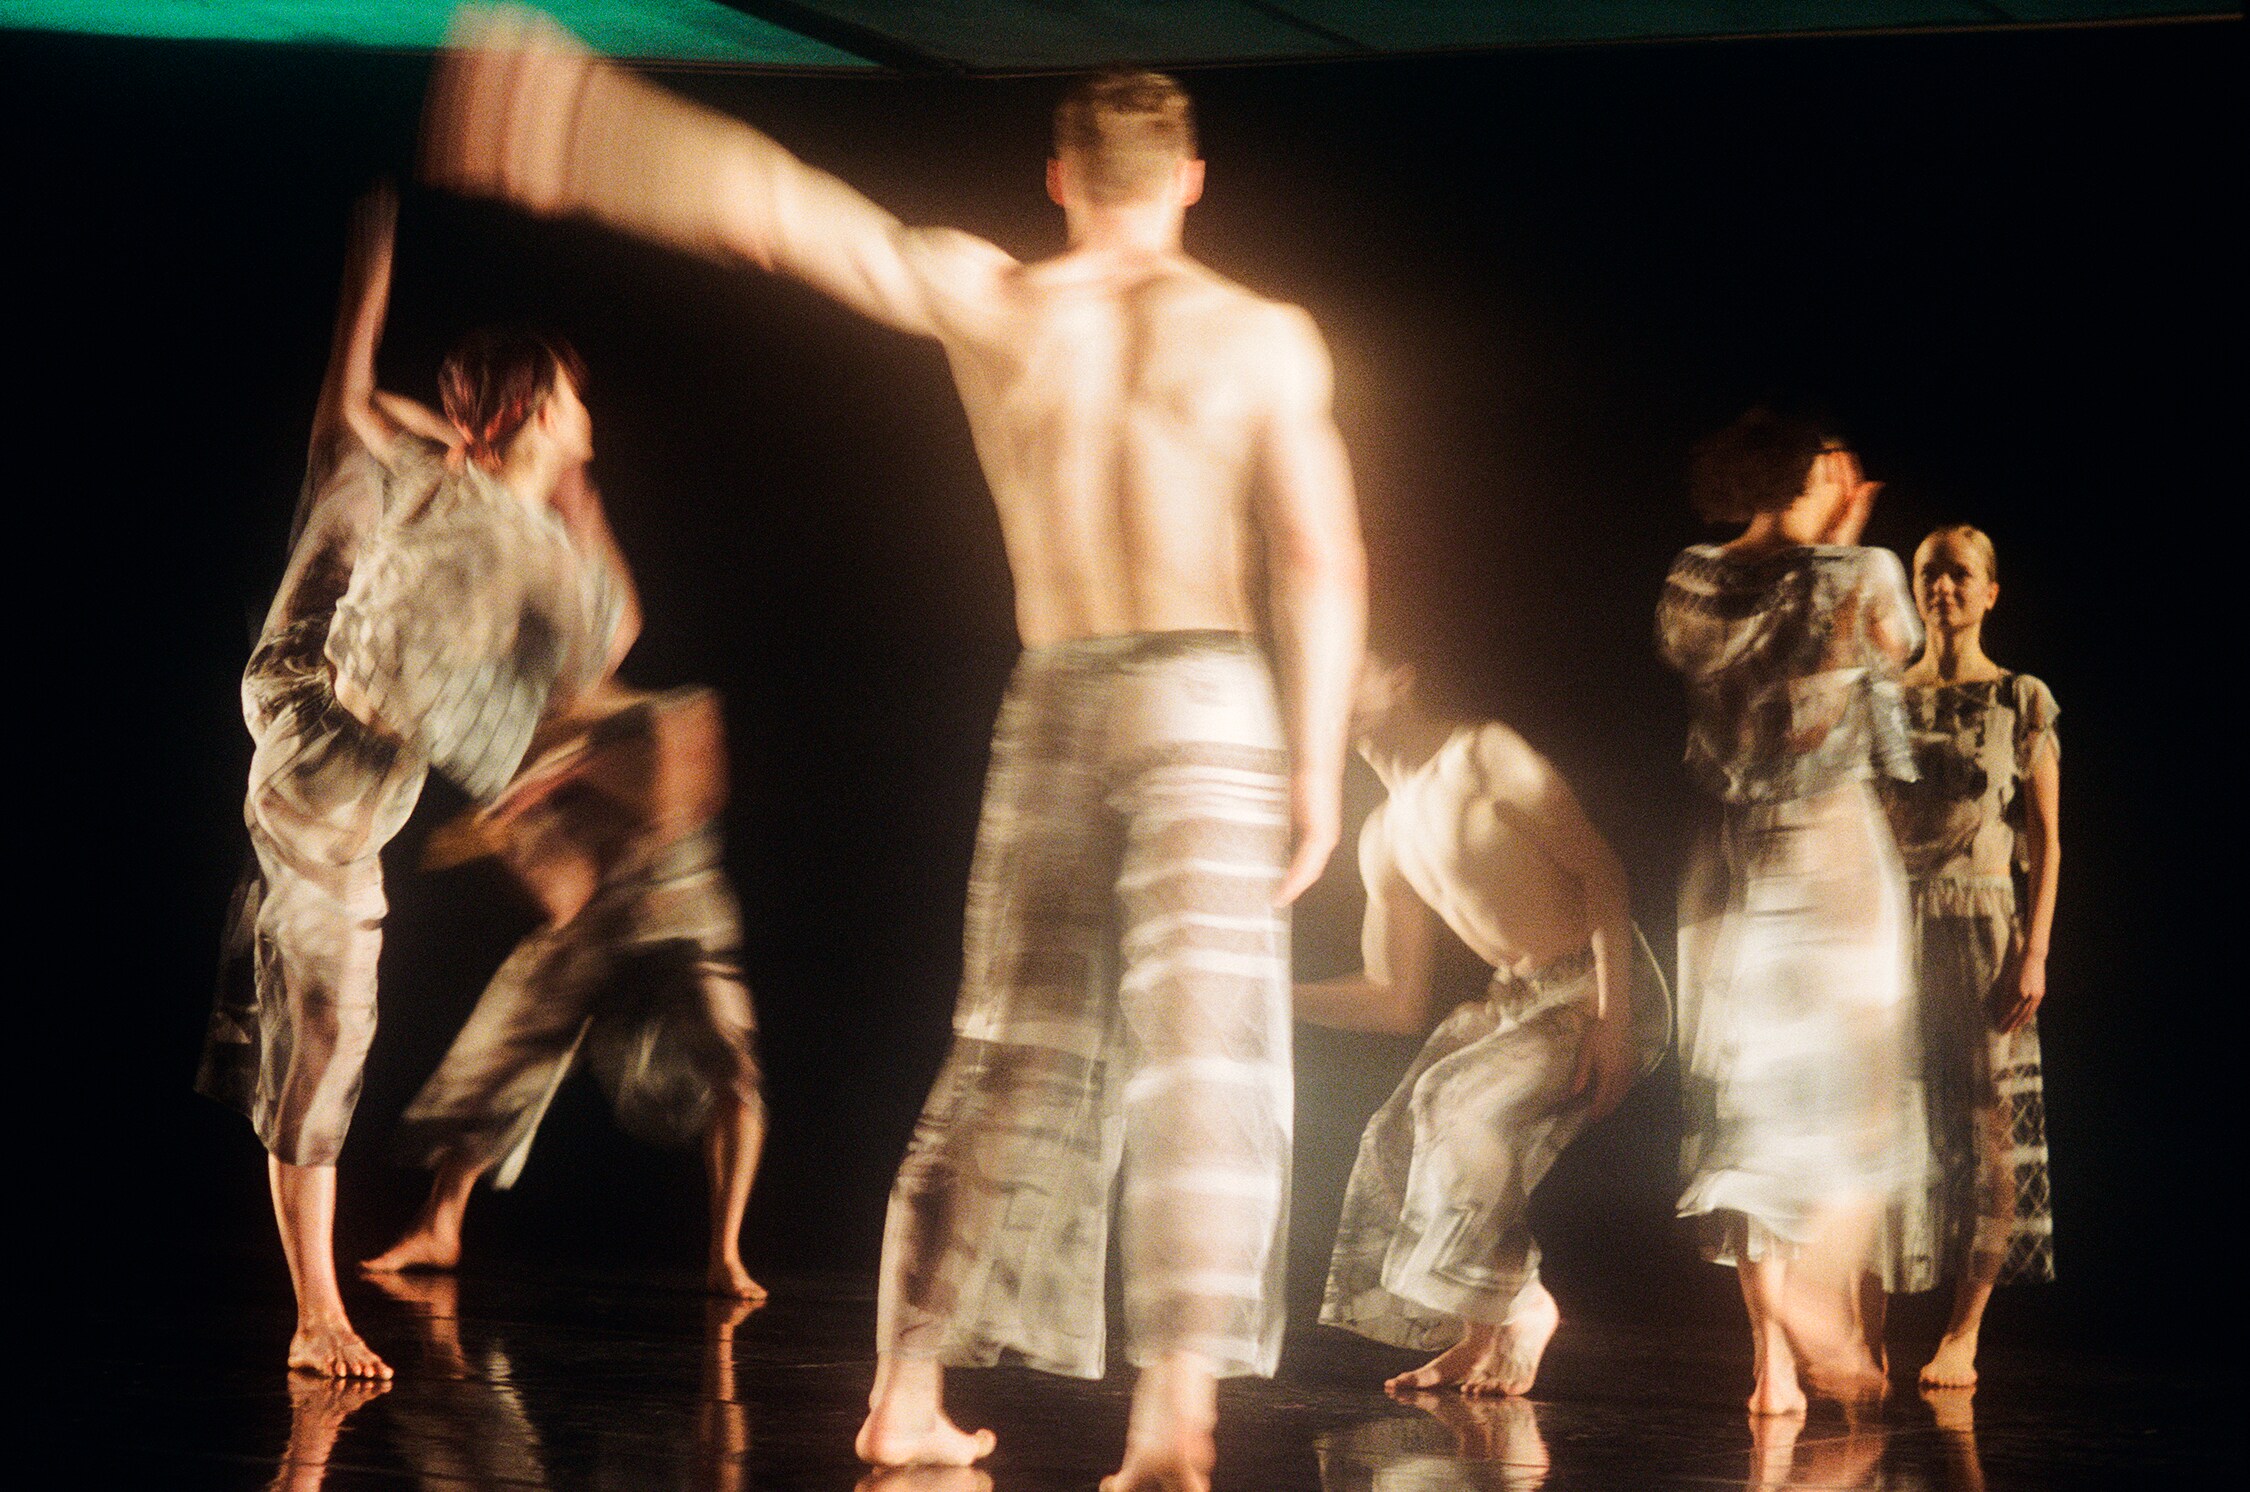 Six dancers standing and in movement